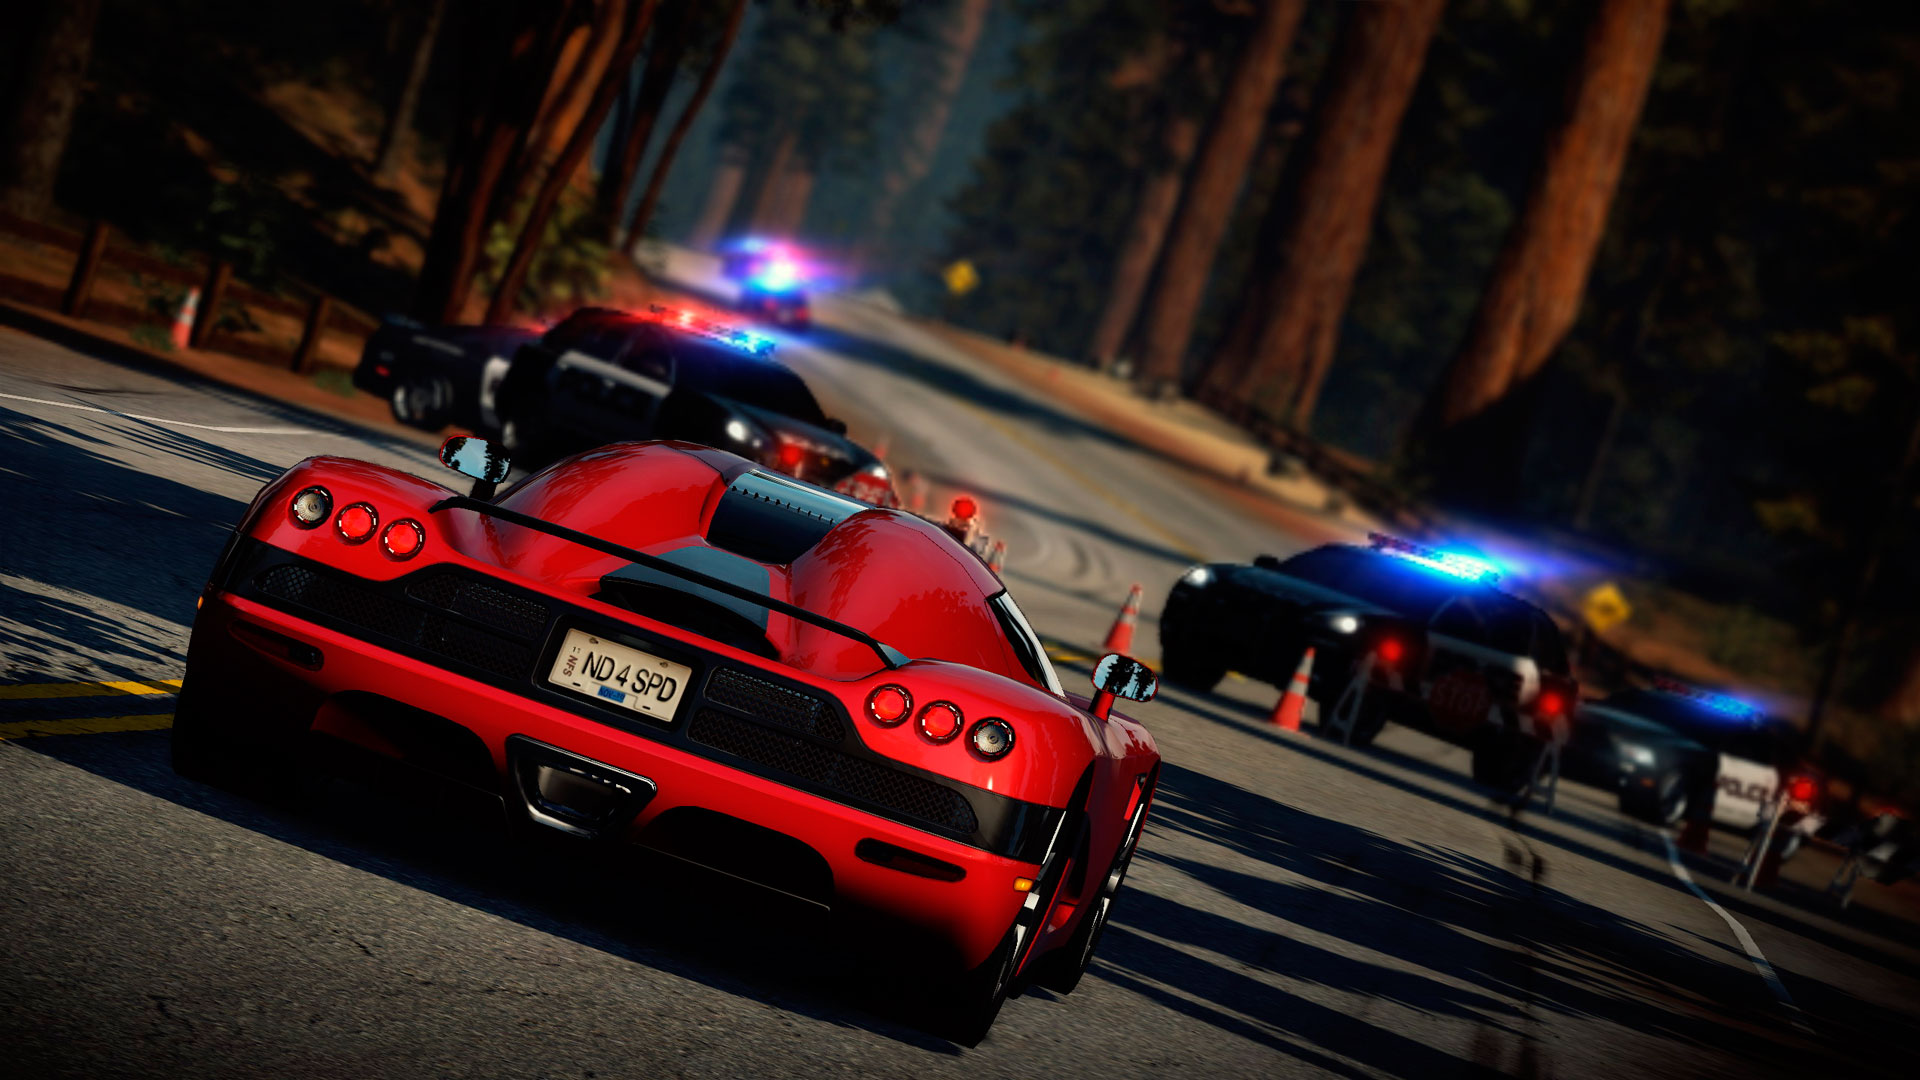 Pursuit Wallpaper Hot Speed Features Image